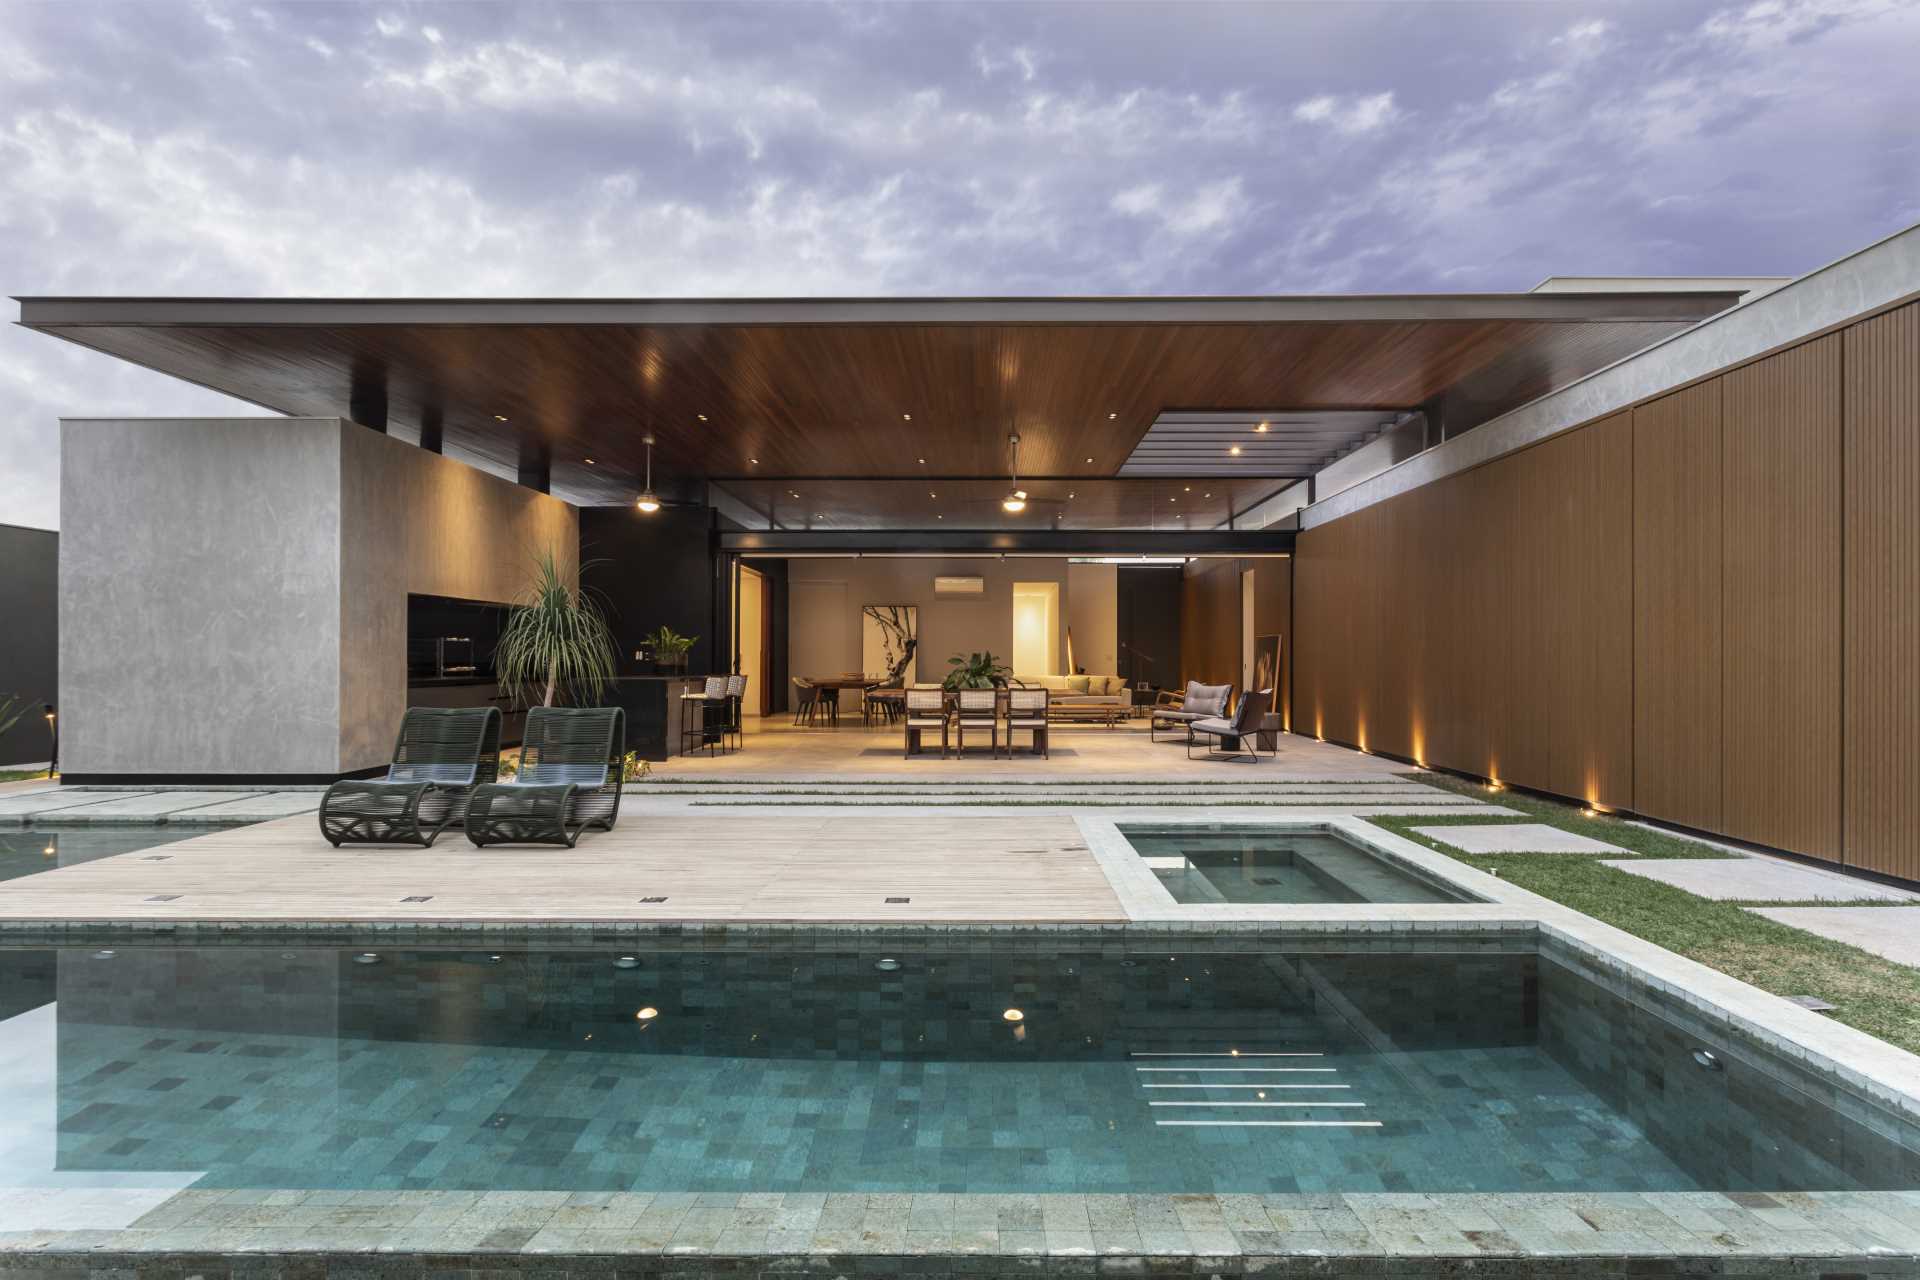 A modern house with a large double-height ceiling that covers both the interior and exterior spaces.